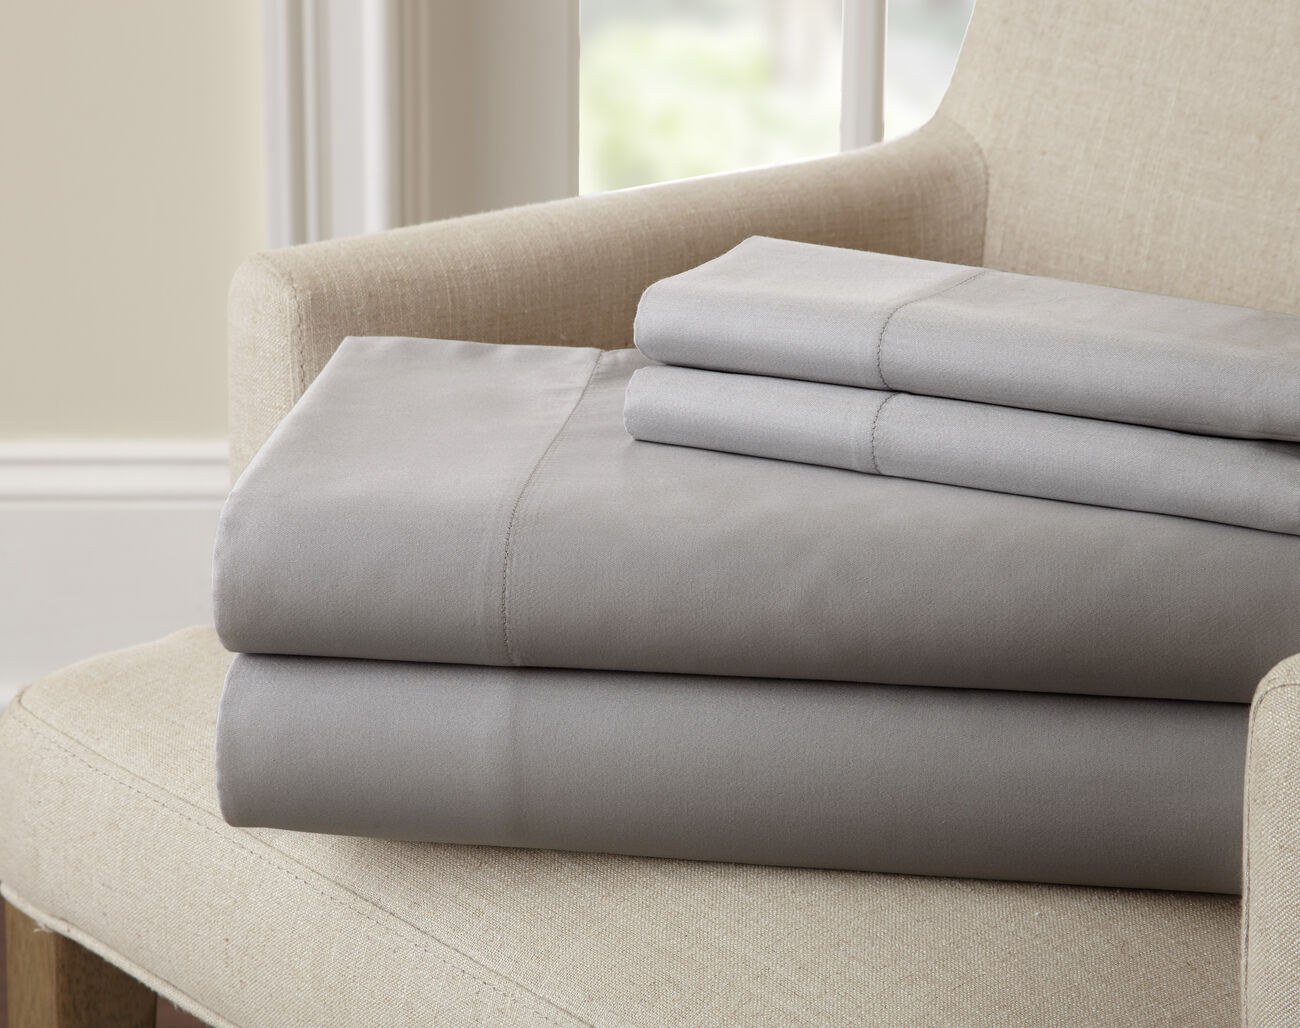 Sassuolo 4 Piece Bamboo Rich Queen Size Sheet Set with 220 Thread Count, Gray